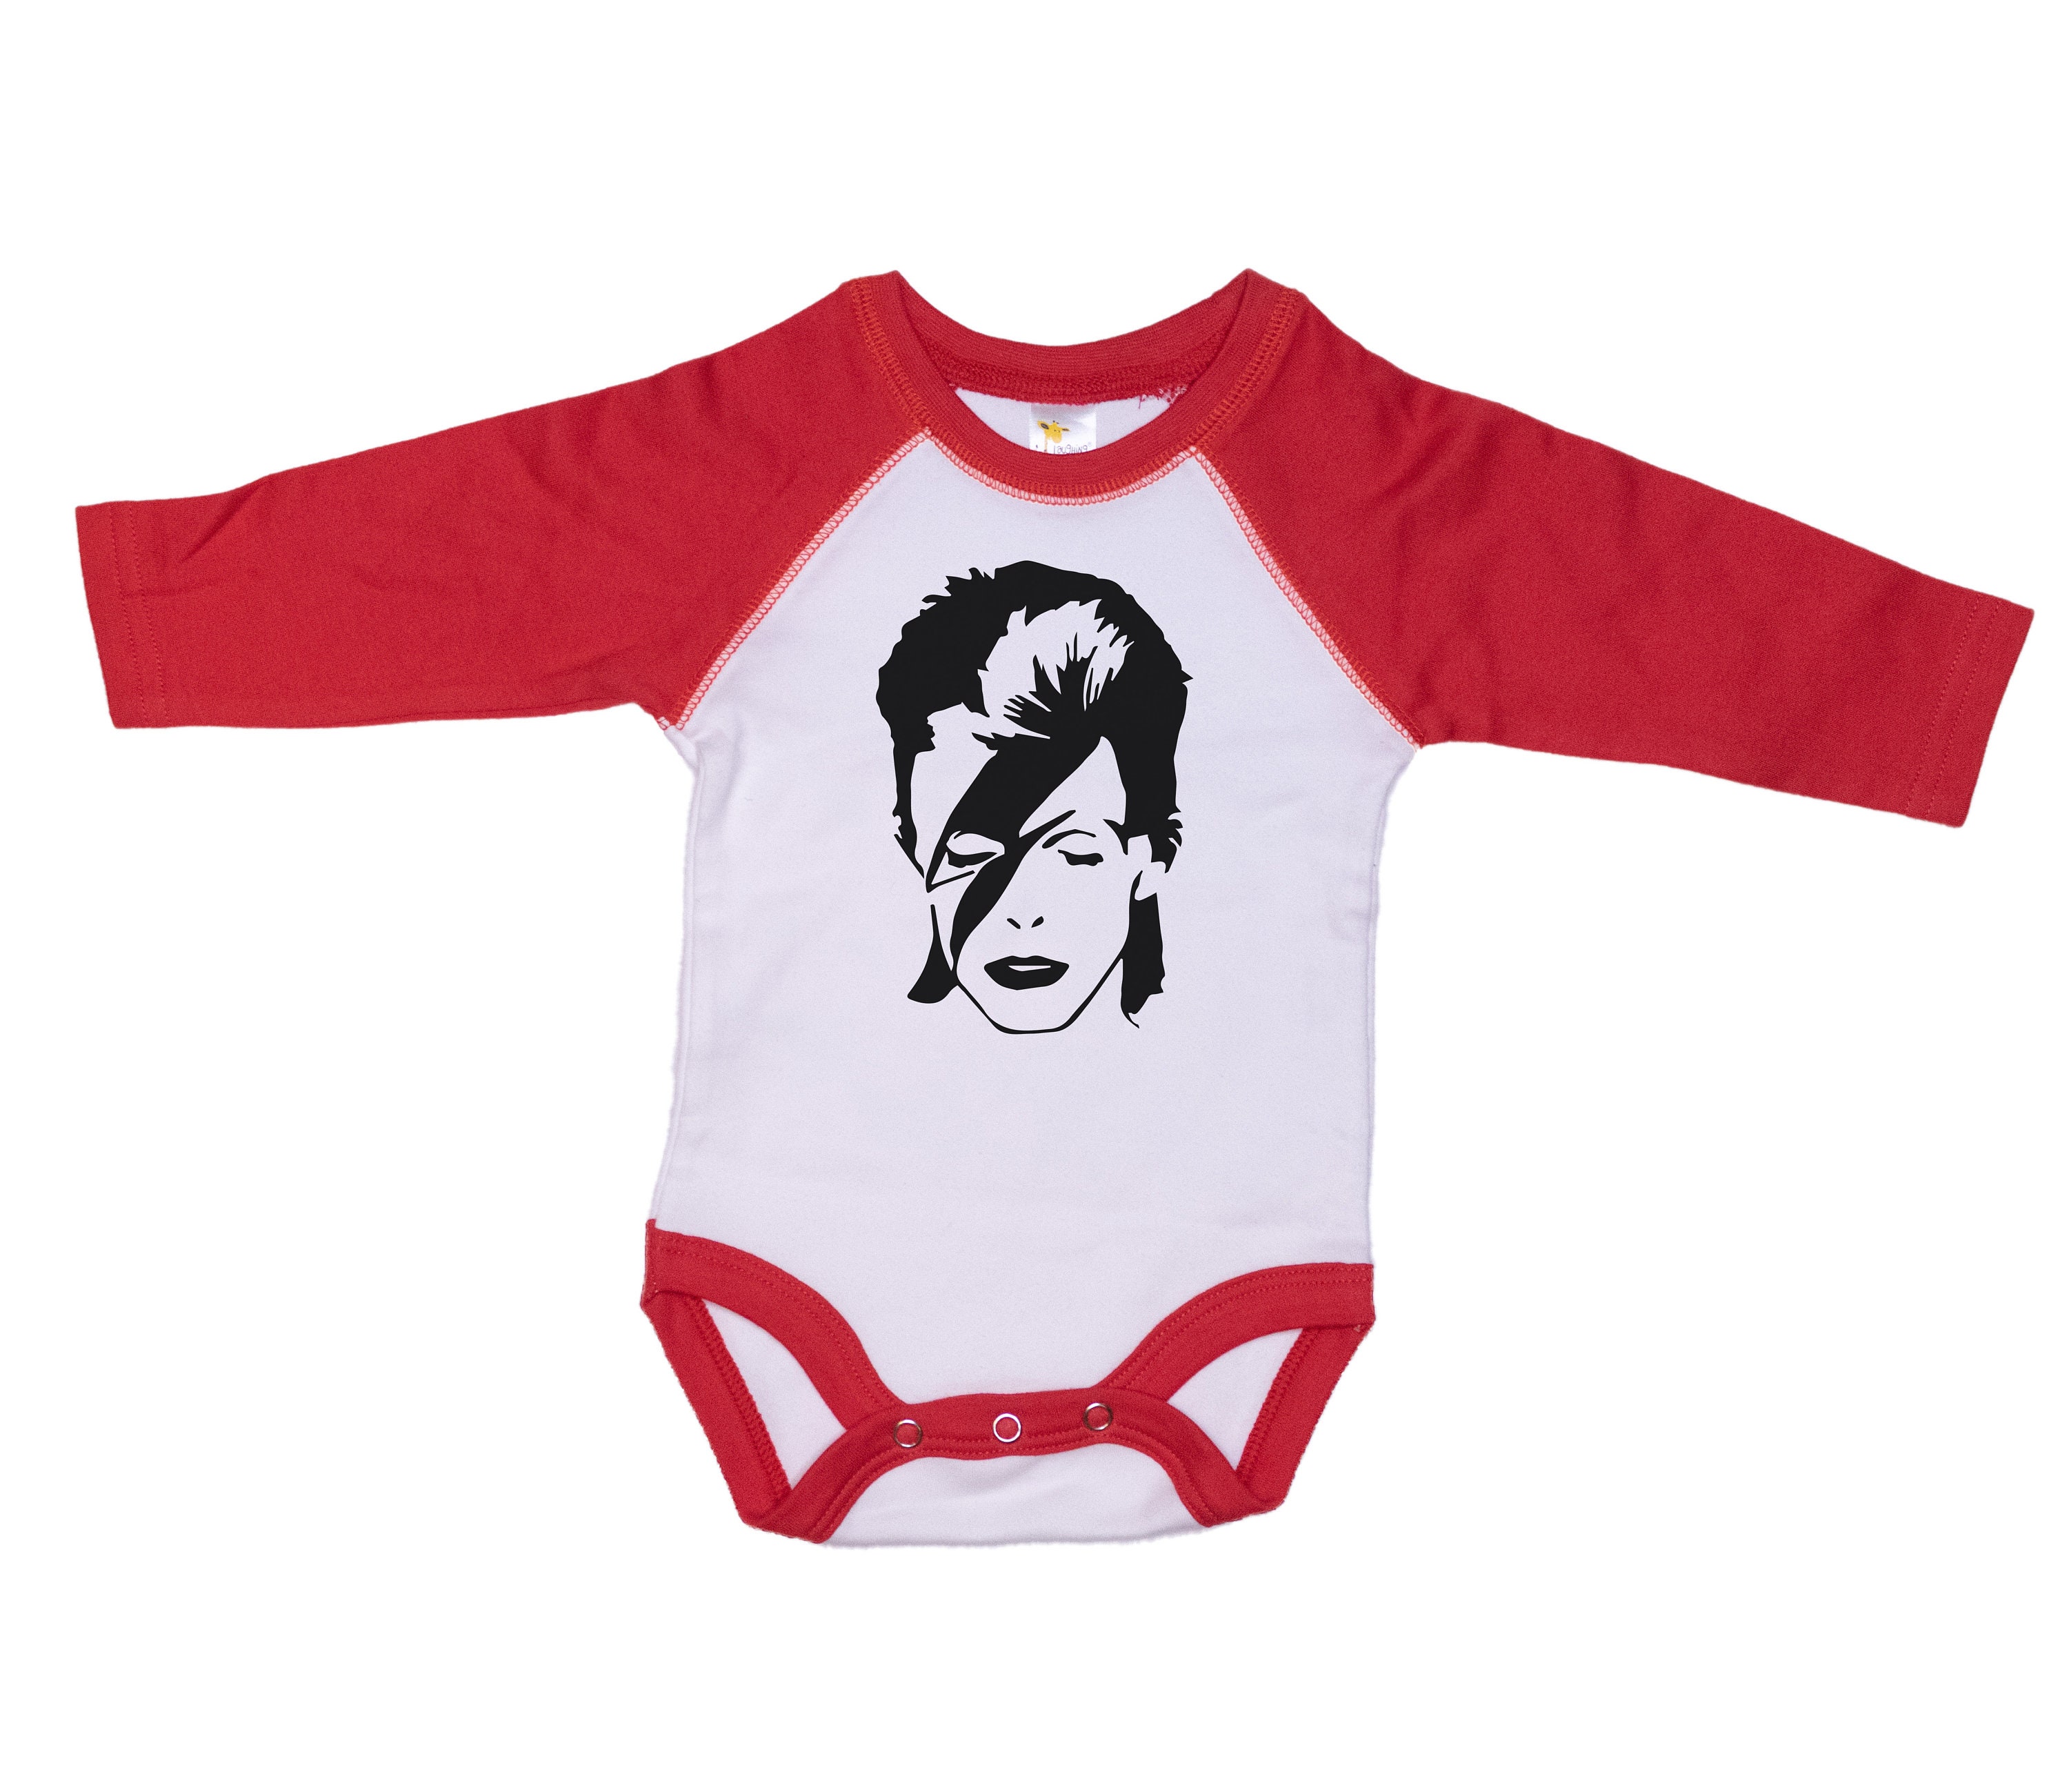 Made to Order Limited Edition David Bowie/ Ziggy Stardust Inspired One Shoulder-One Leg Bodysuit Flame Costume